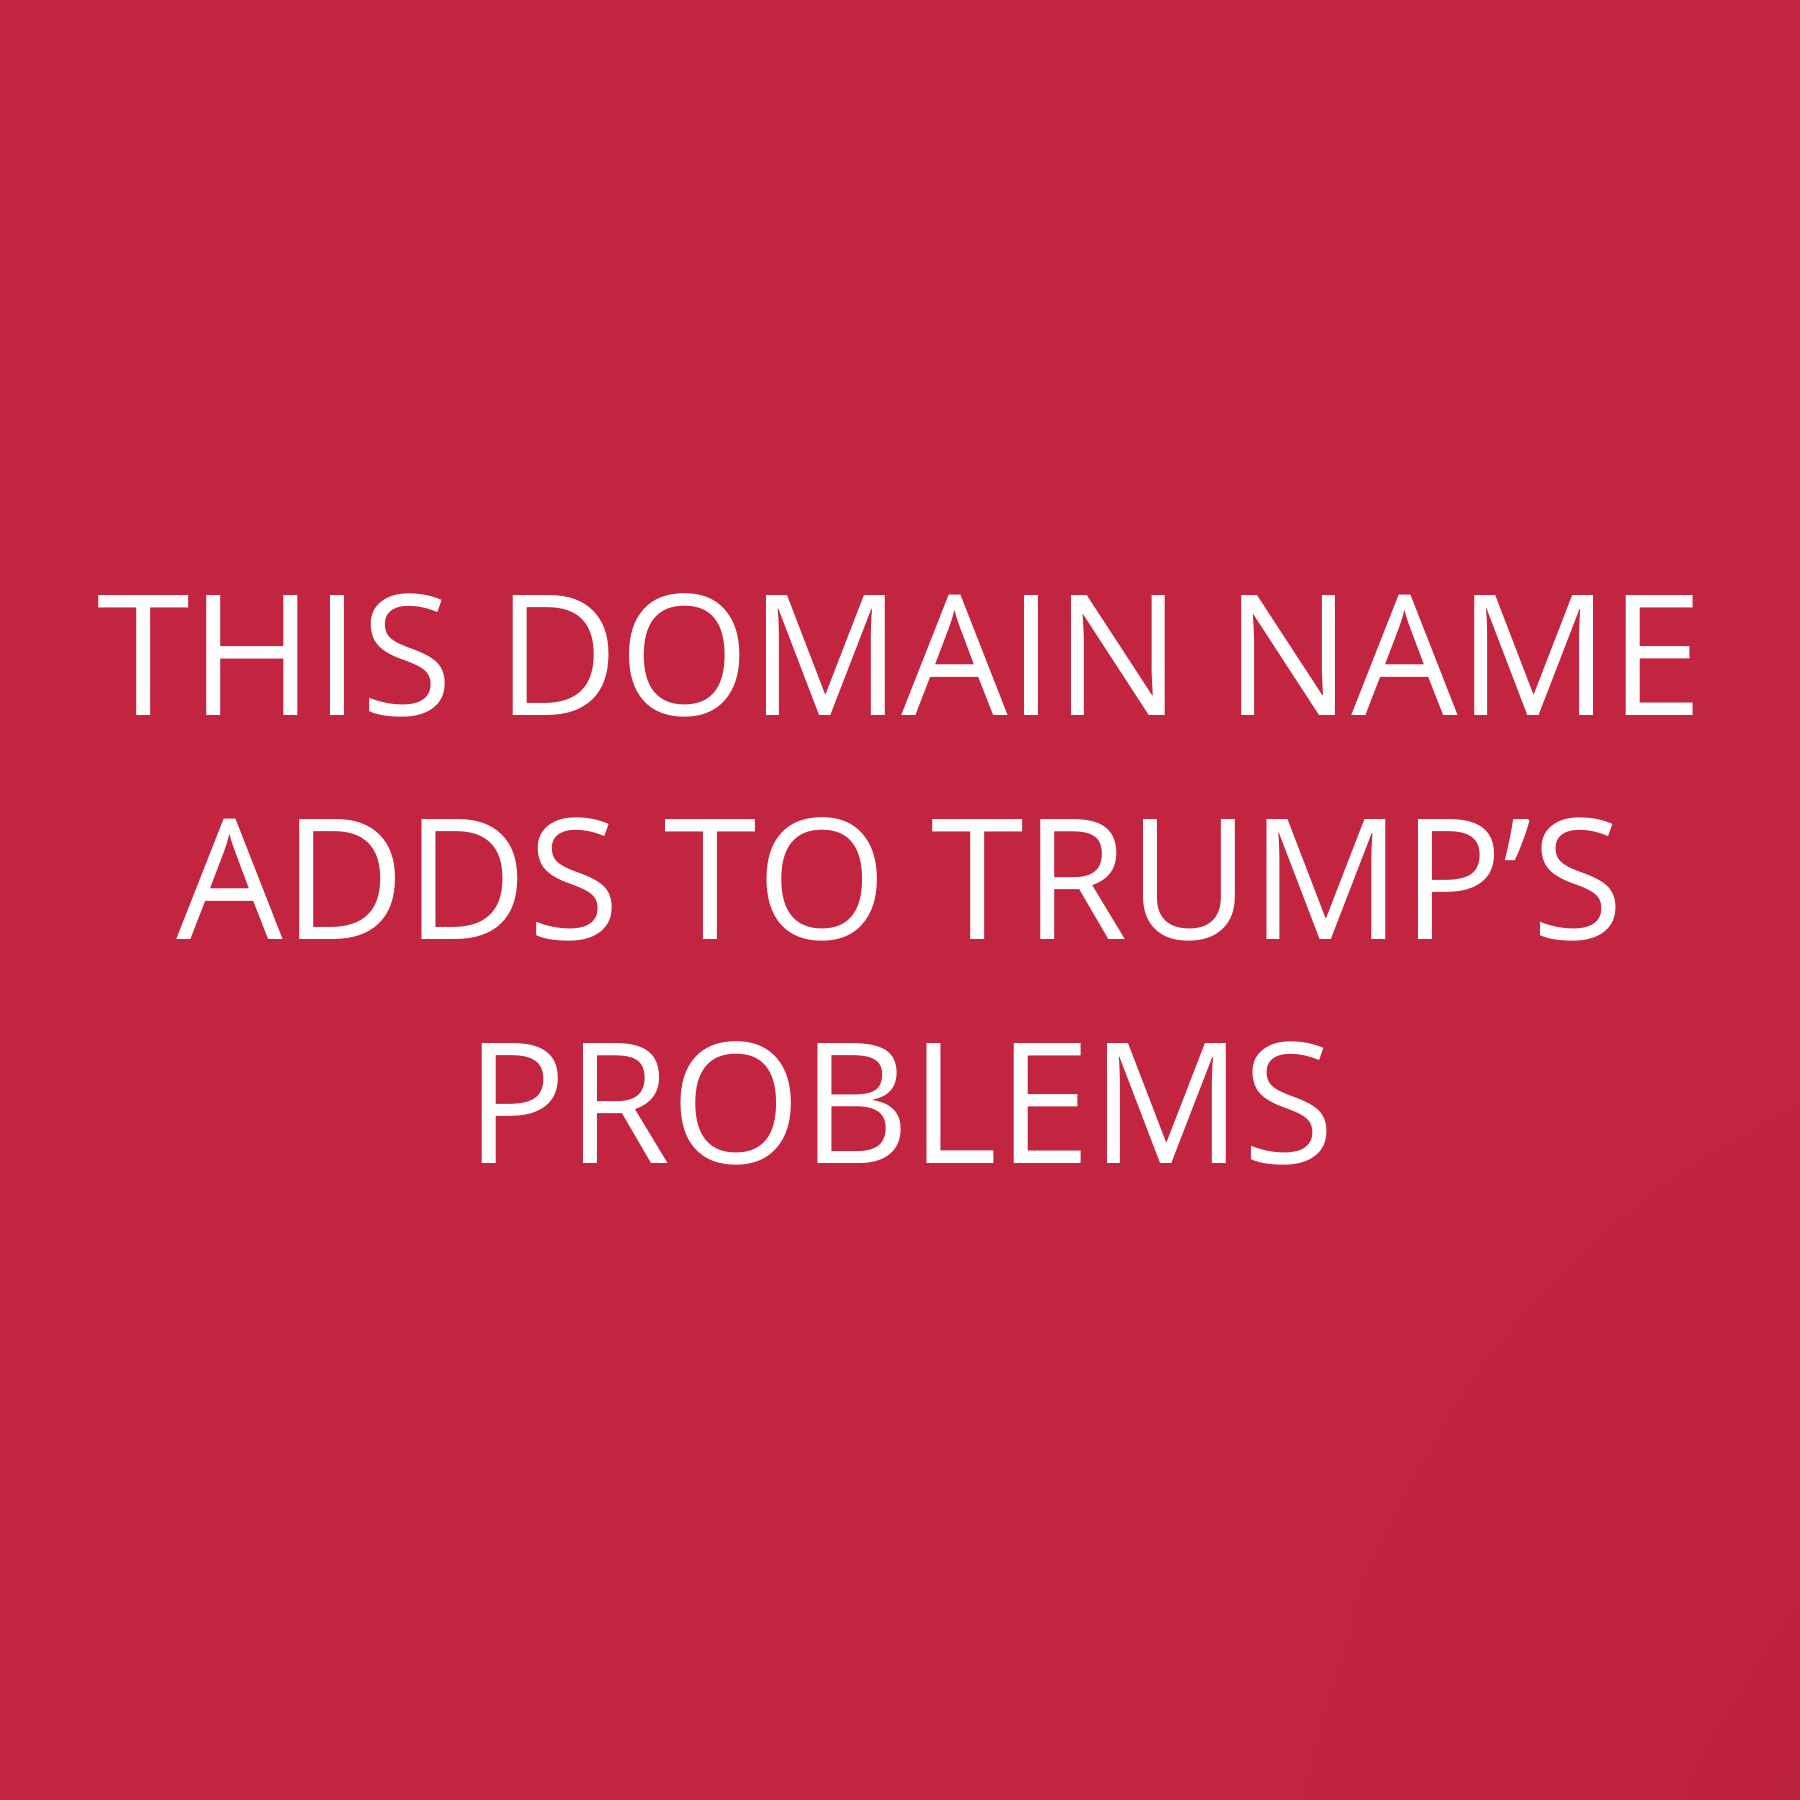 This domain name adds to Trump’s problems